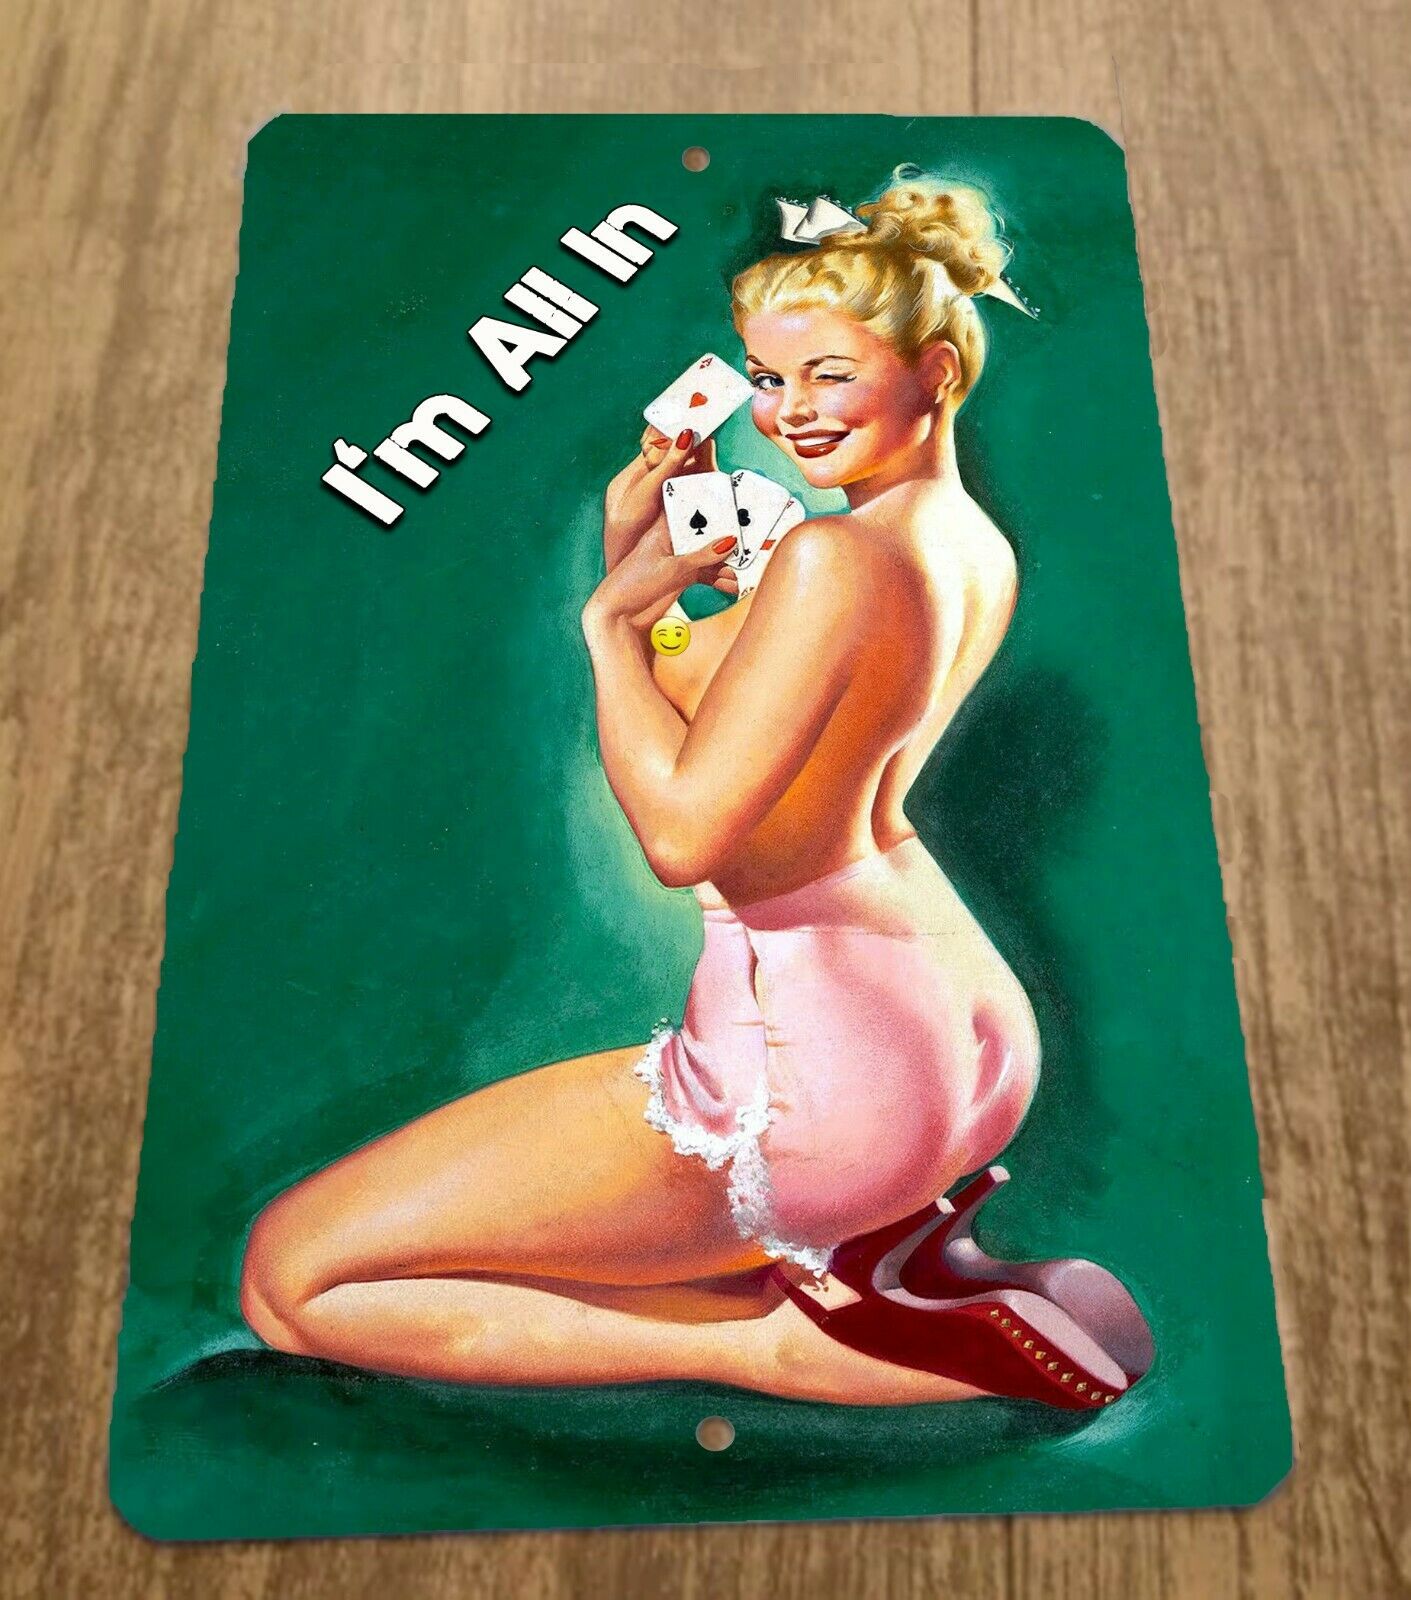 Im All In 4 of a Kind Aces Pinup Girl 8x12 Metal Wall Vintage Misc Poster Sign